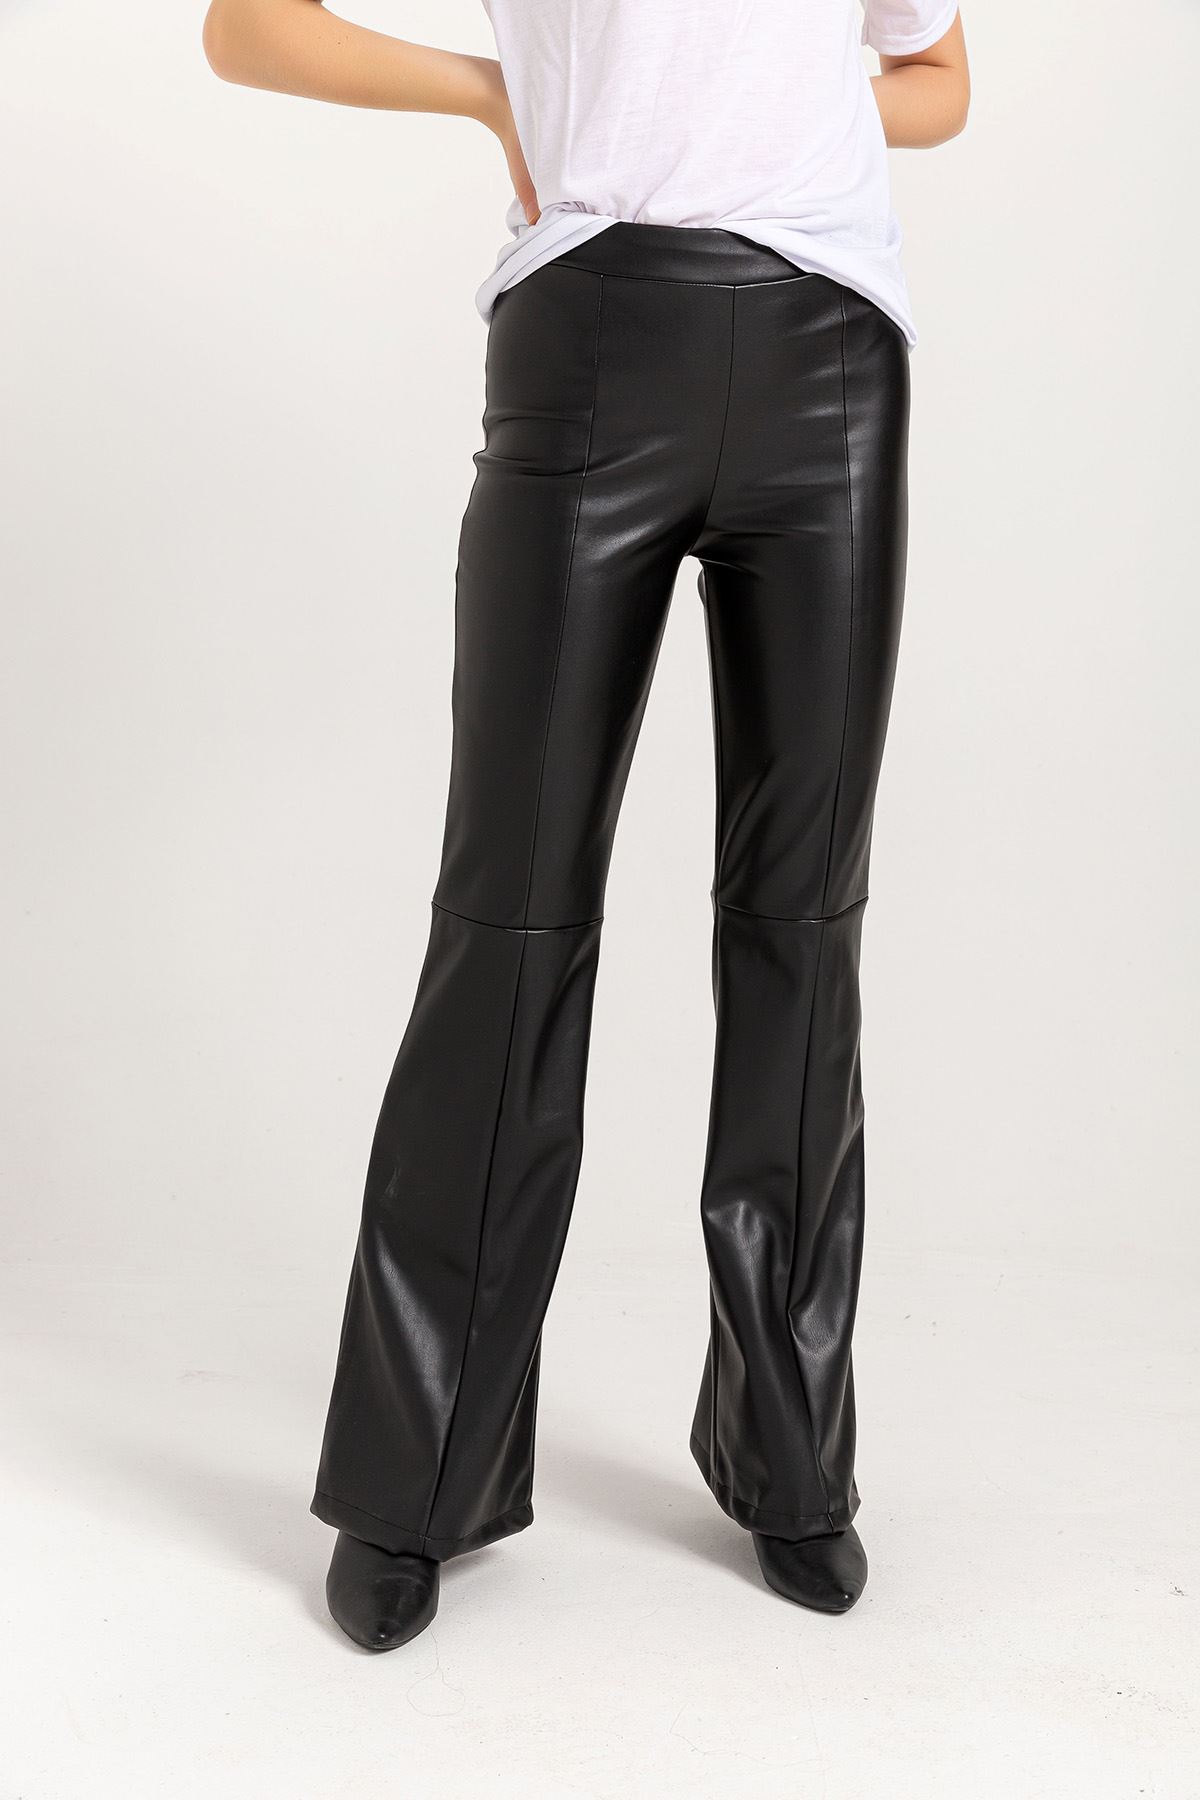 Leather Fabric Long Tigth Fit Flare Women'S Trouser - Black